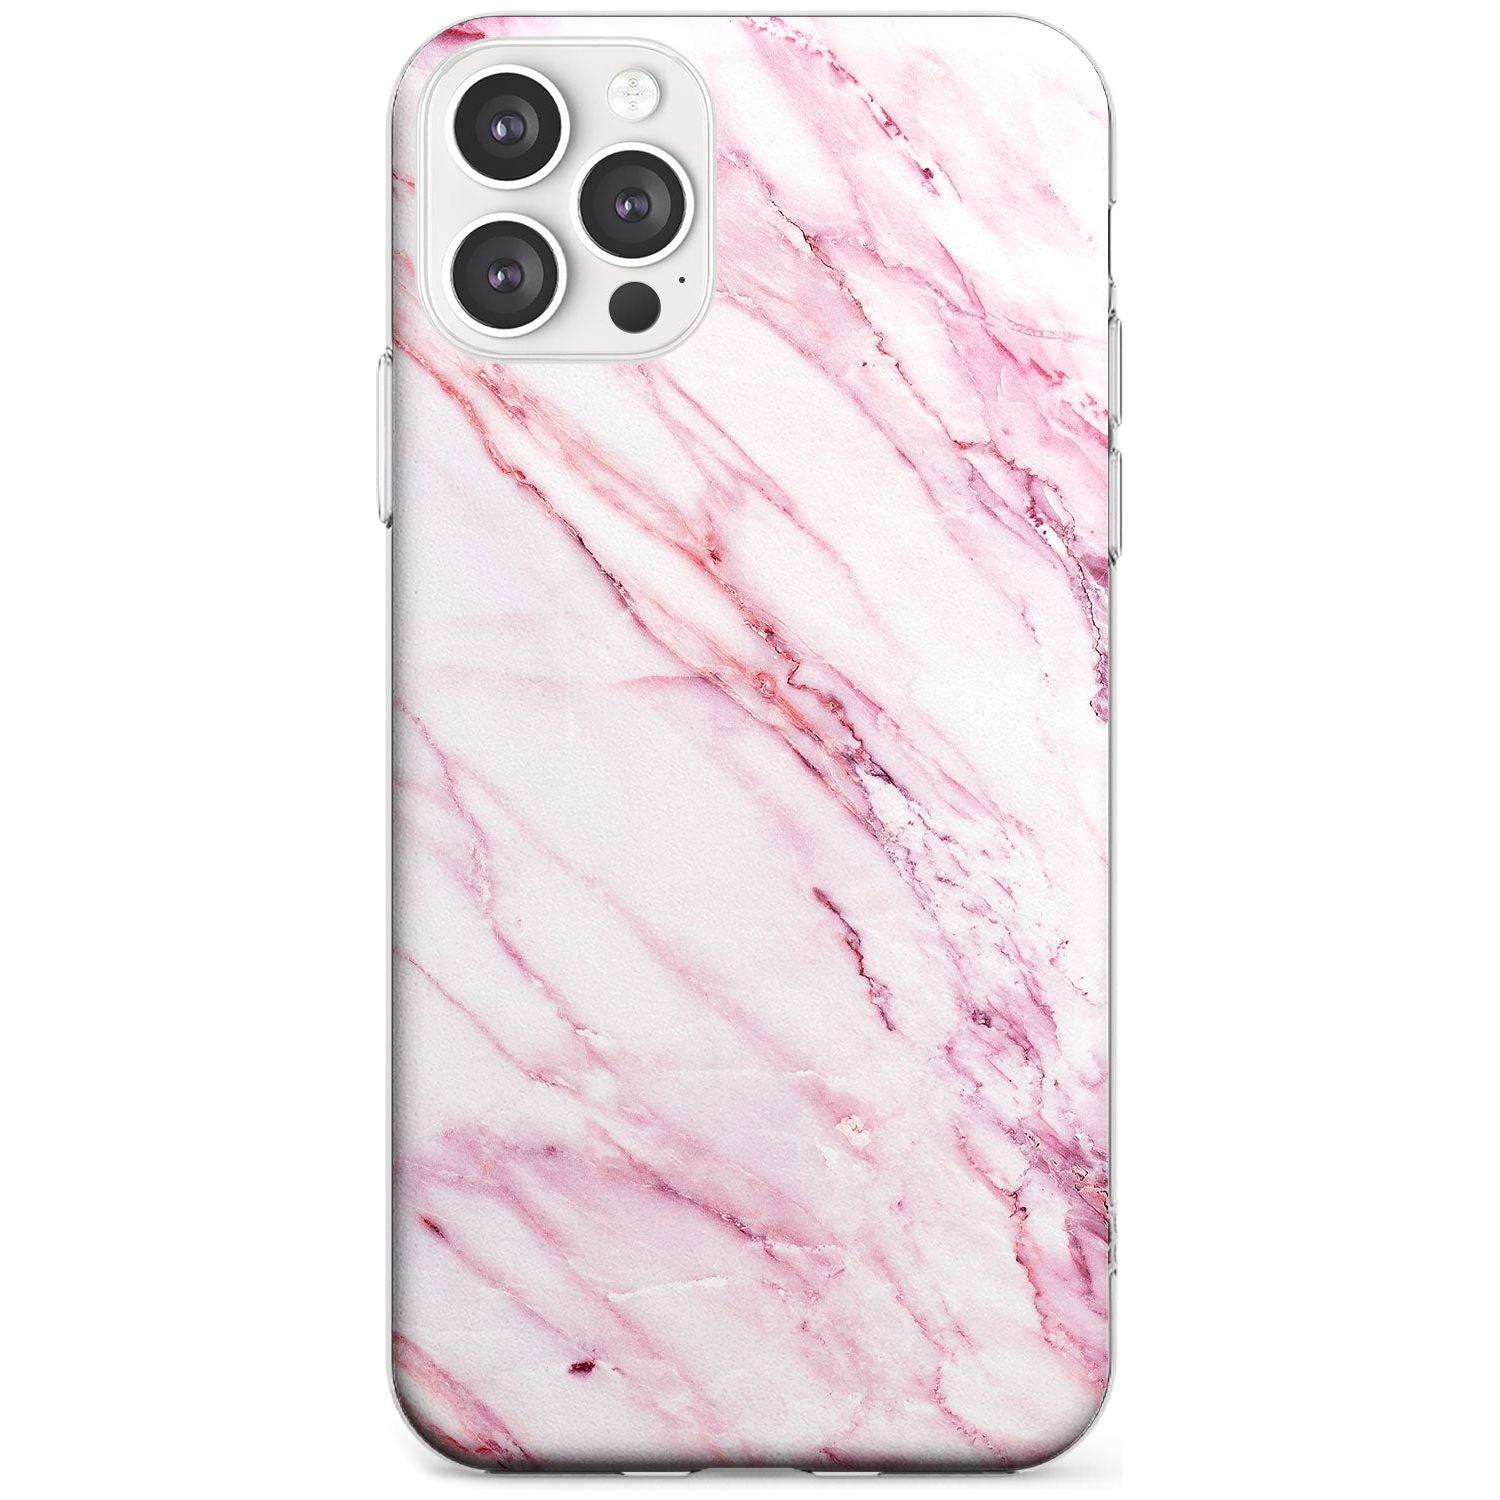 White & Pink Onyx Marble Texture Black Impact Phone Case for iPhone 11 Pro Max